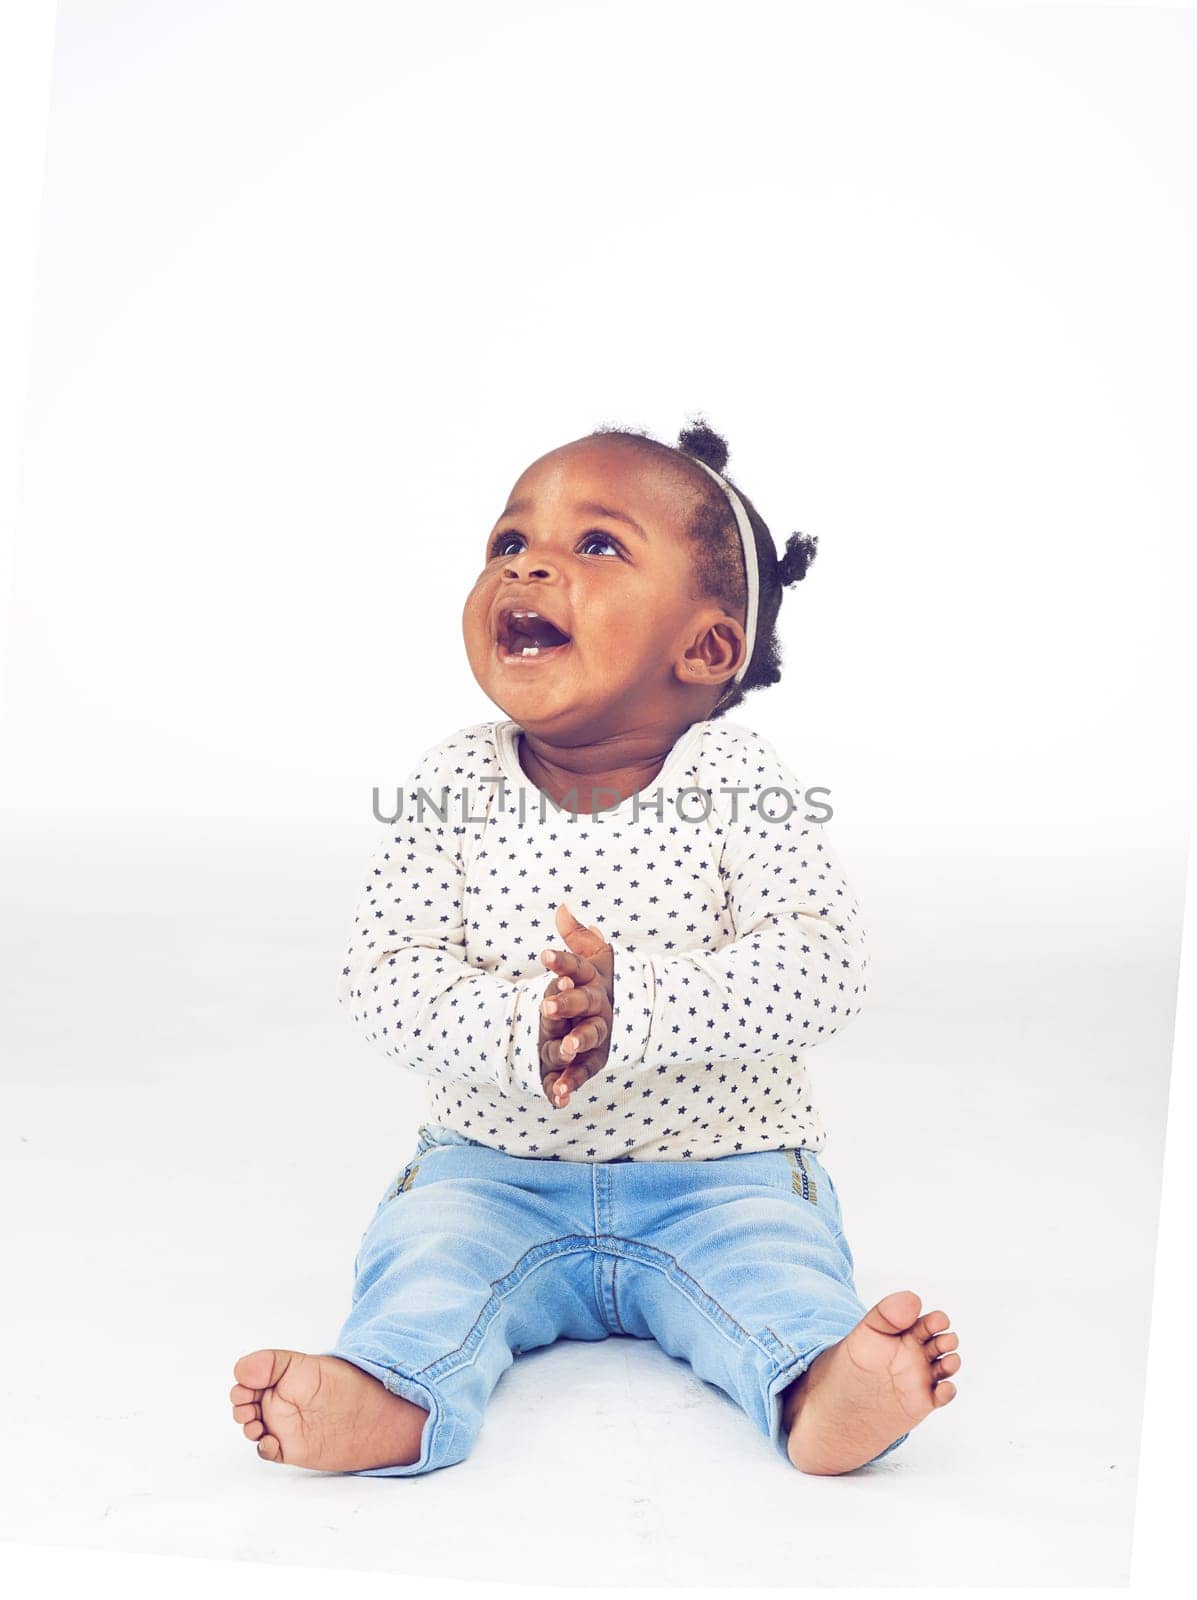 Black baby, girl or excited to relax, laugh or vision for clapping, funny or idea on white background. Toddler, smile or on floor to imagine, curiosity or wonder of childhood on studio mock up by YuriArcurs